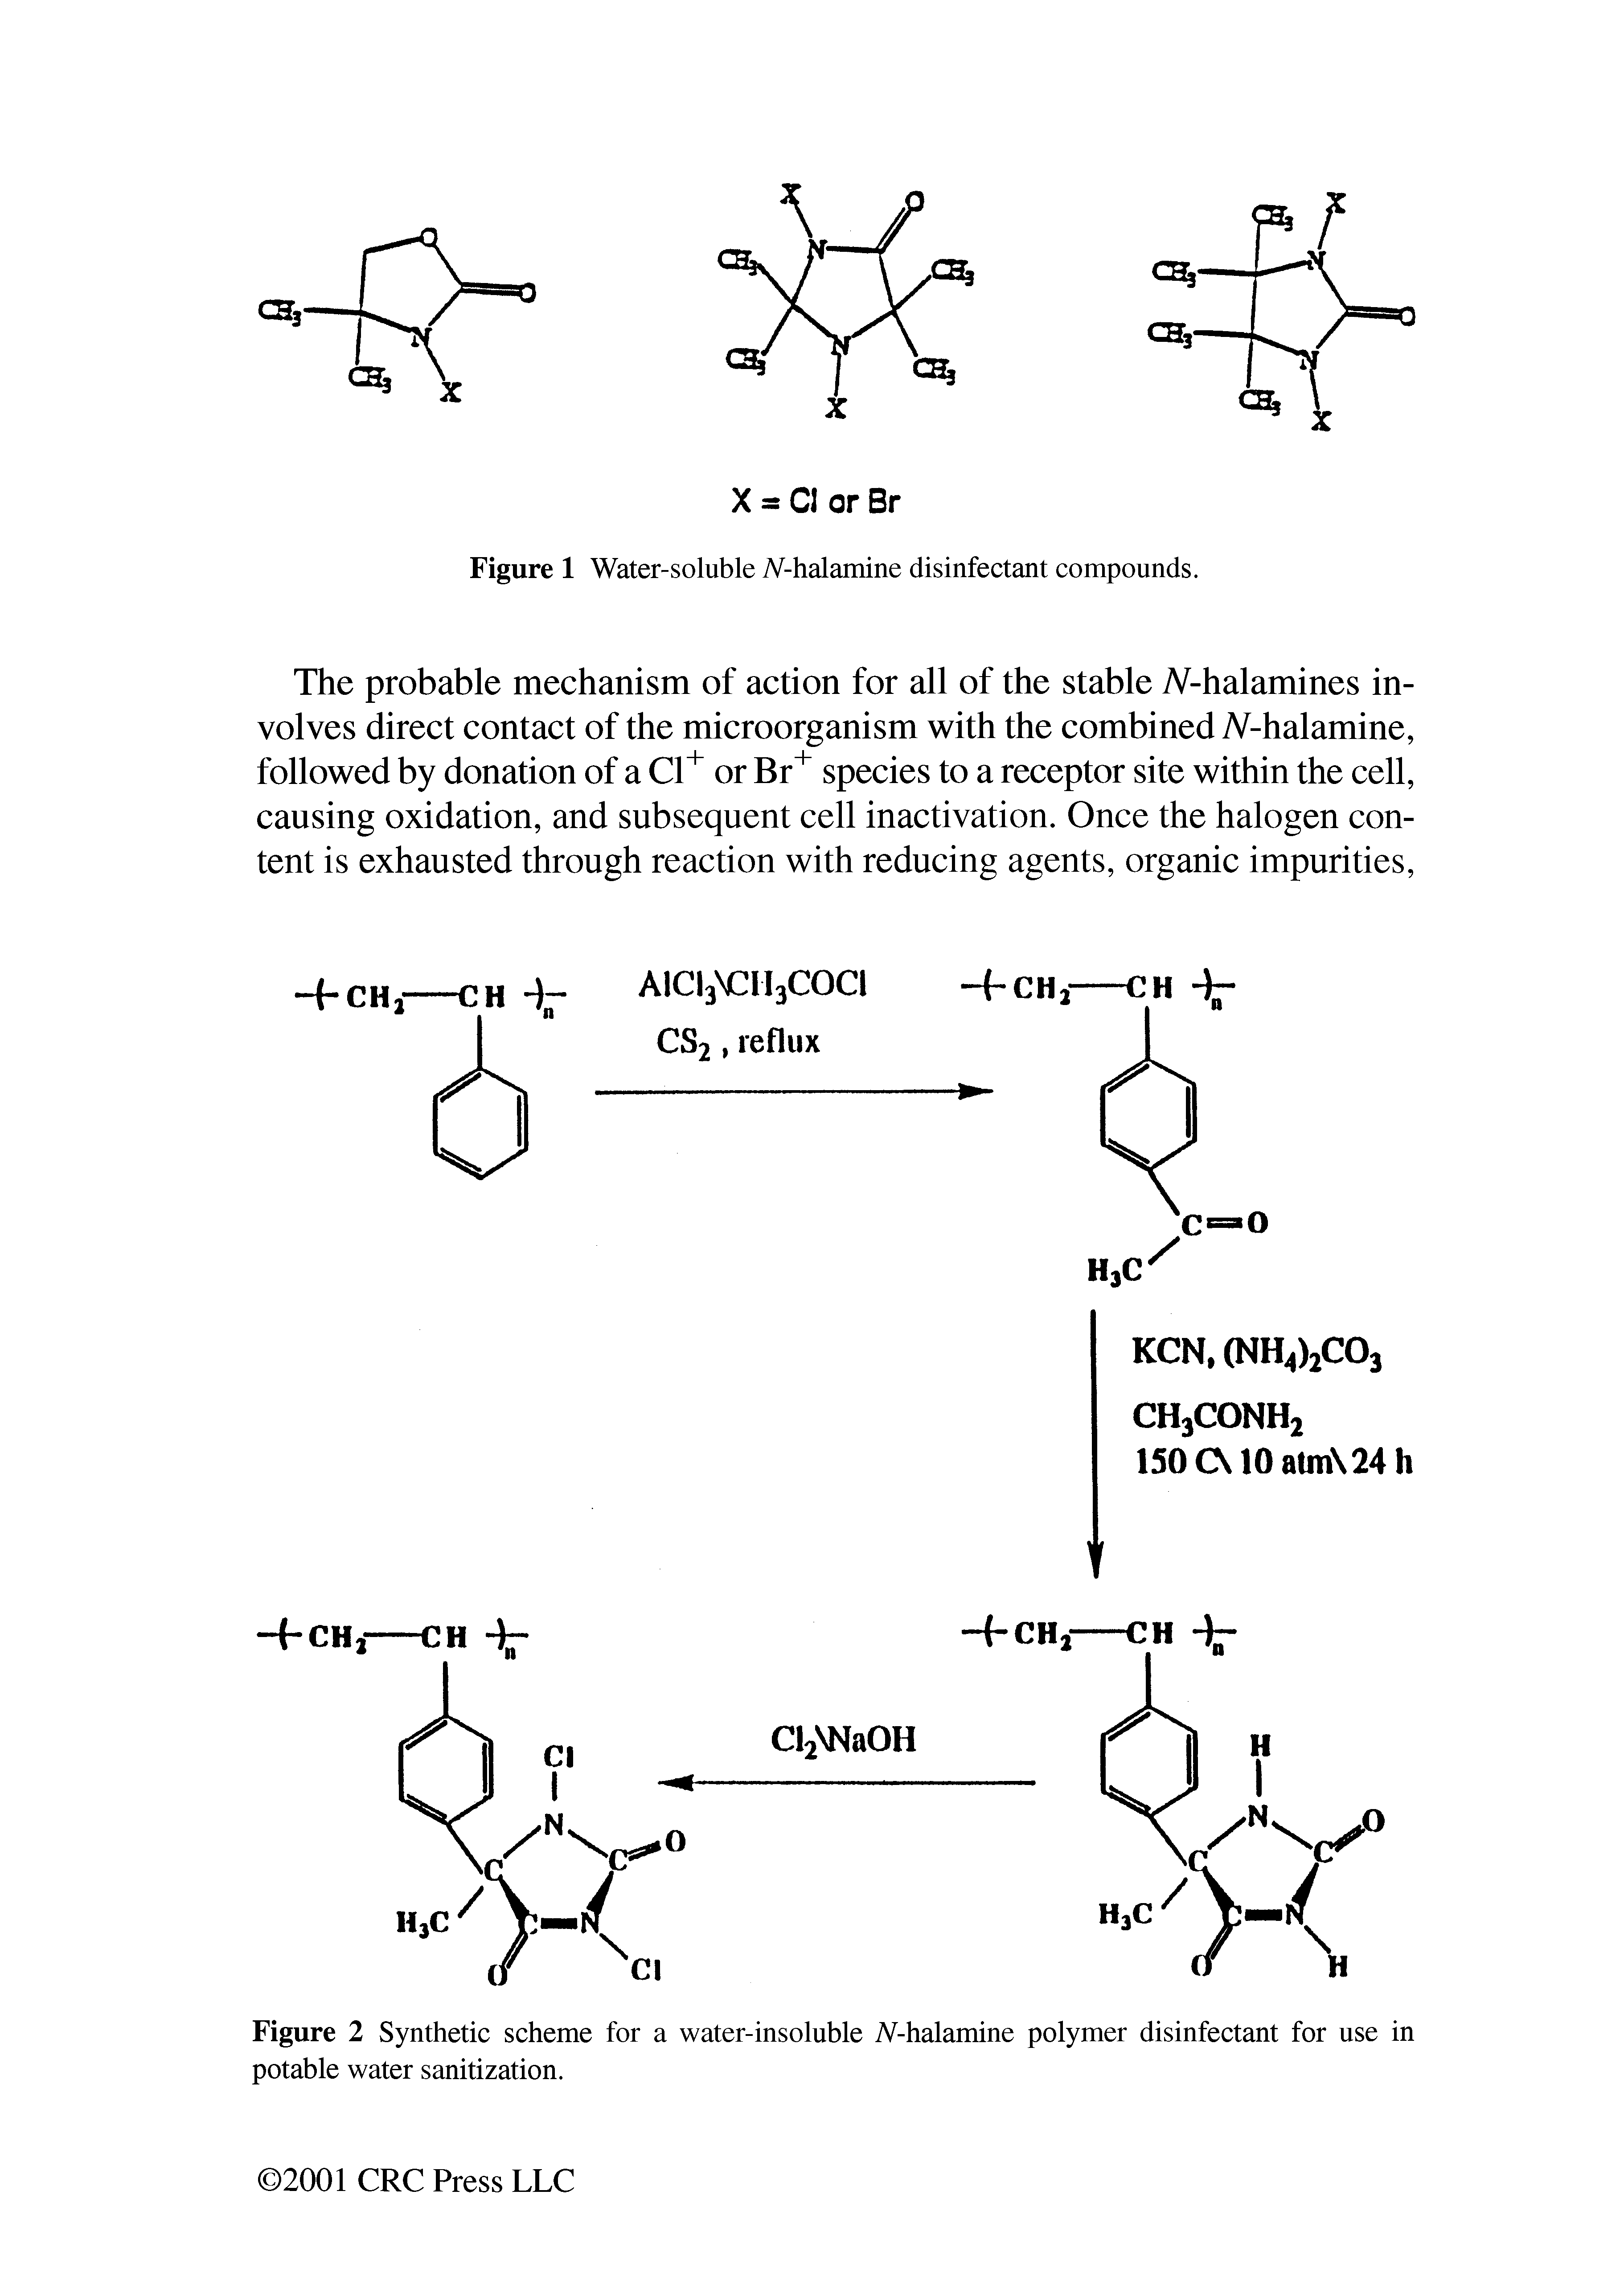 Figure 2 Synthetic scheme for a water-insoluble Whalamine polymer disinfectant for use in potable water sanitization.